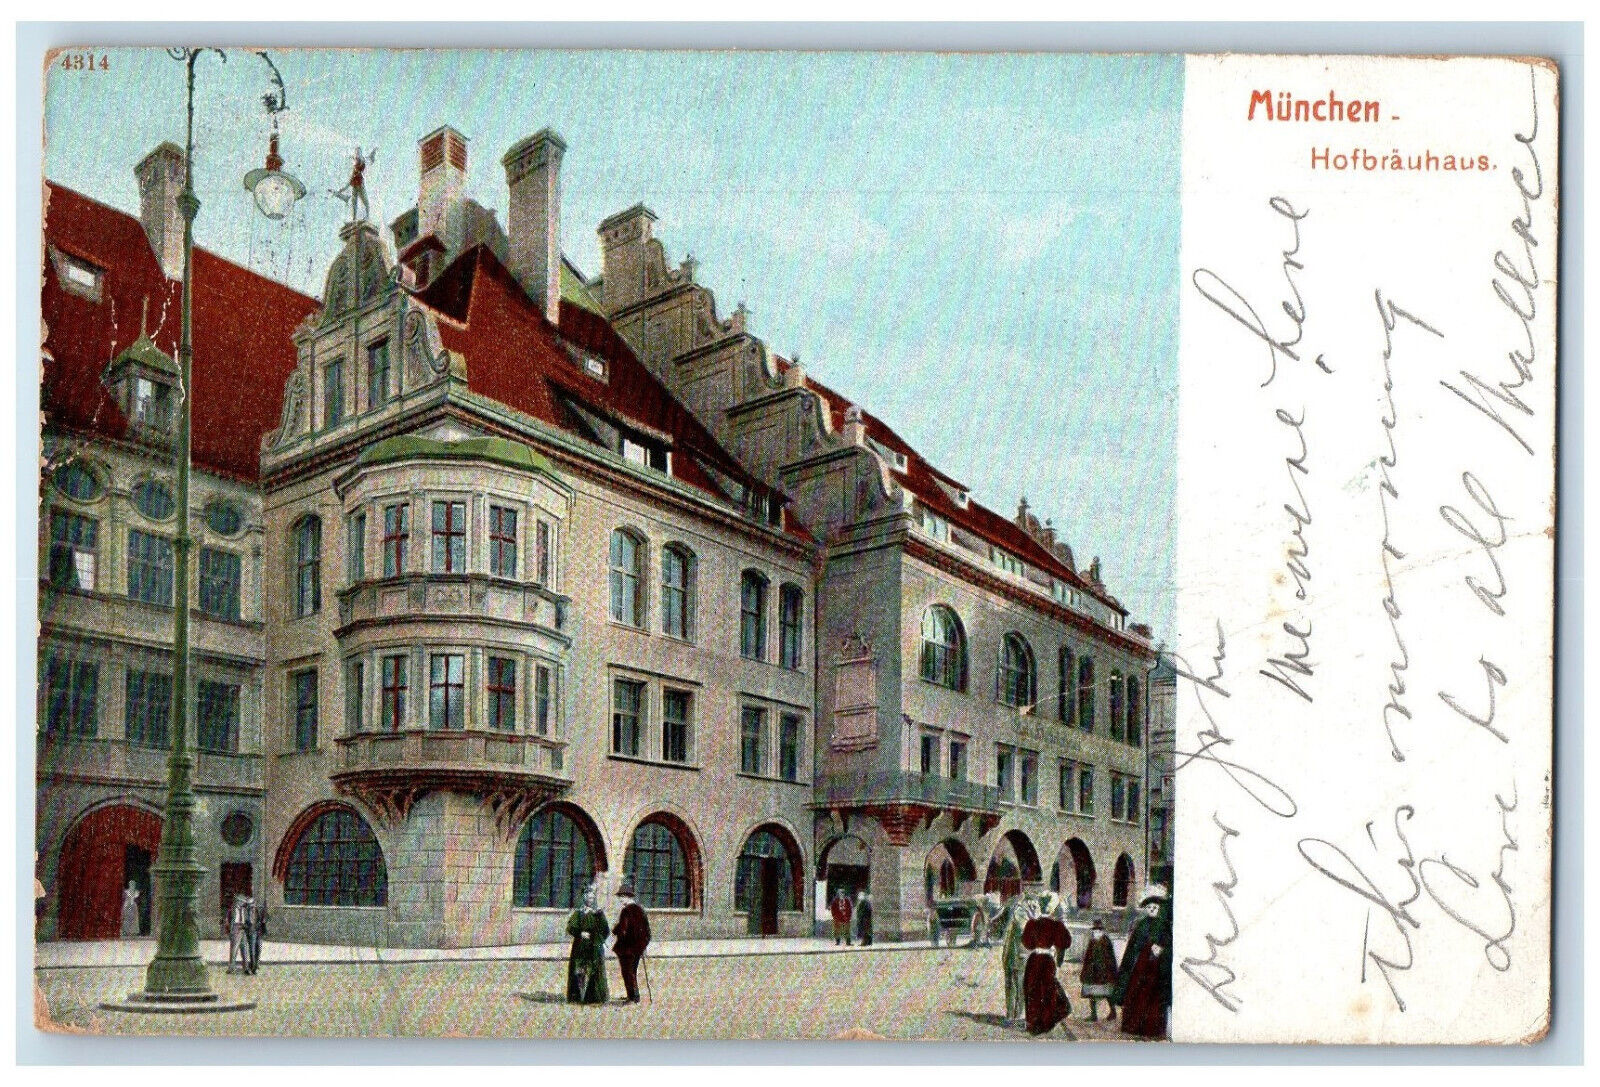 c1905 View of Hofbrauhaus Munchen (Munich) Germany Antique Posted Postcard